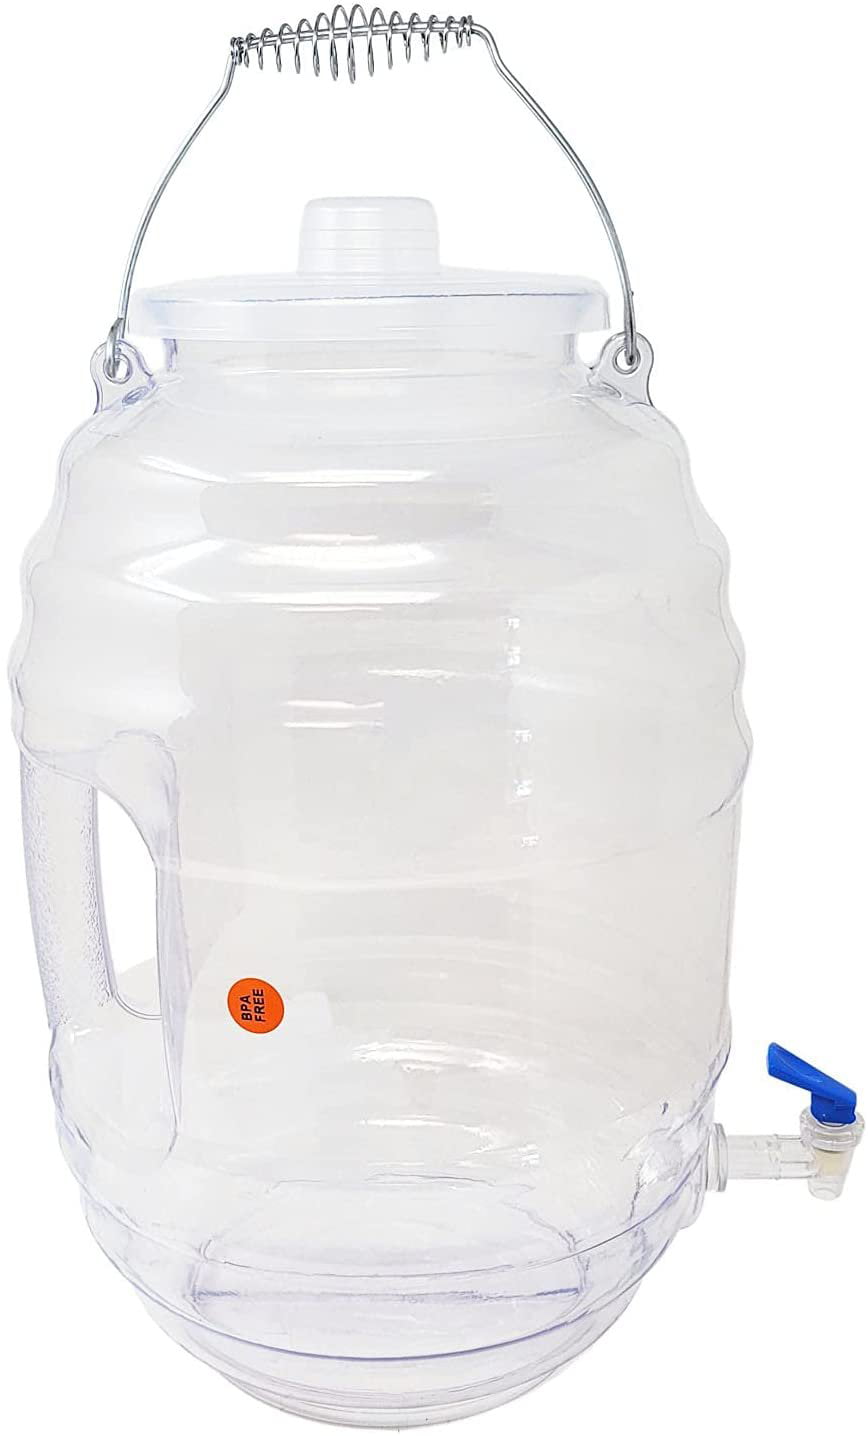 CHAMPS 5 Gallon Jug with Lid and Spout - Aguas Frescas Vitrolero Plastic  Water Container - 5 Gallon Drink Dispenser - Large Beverage Dispenser Ideal